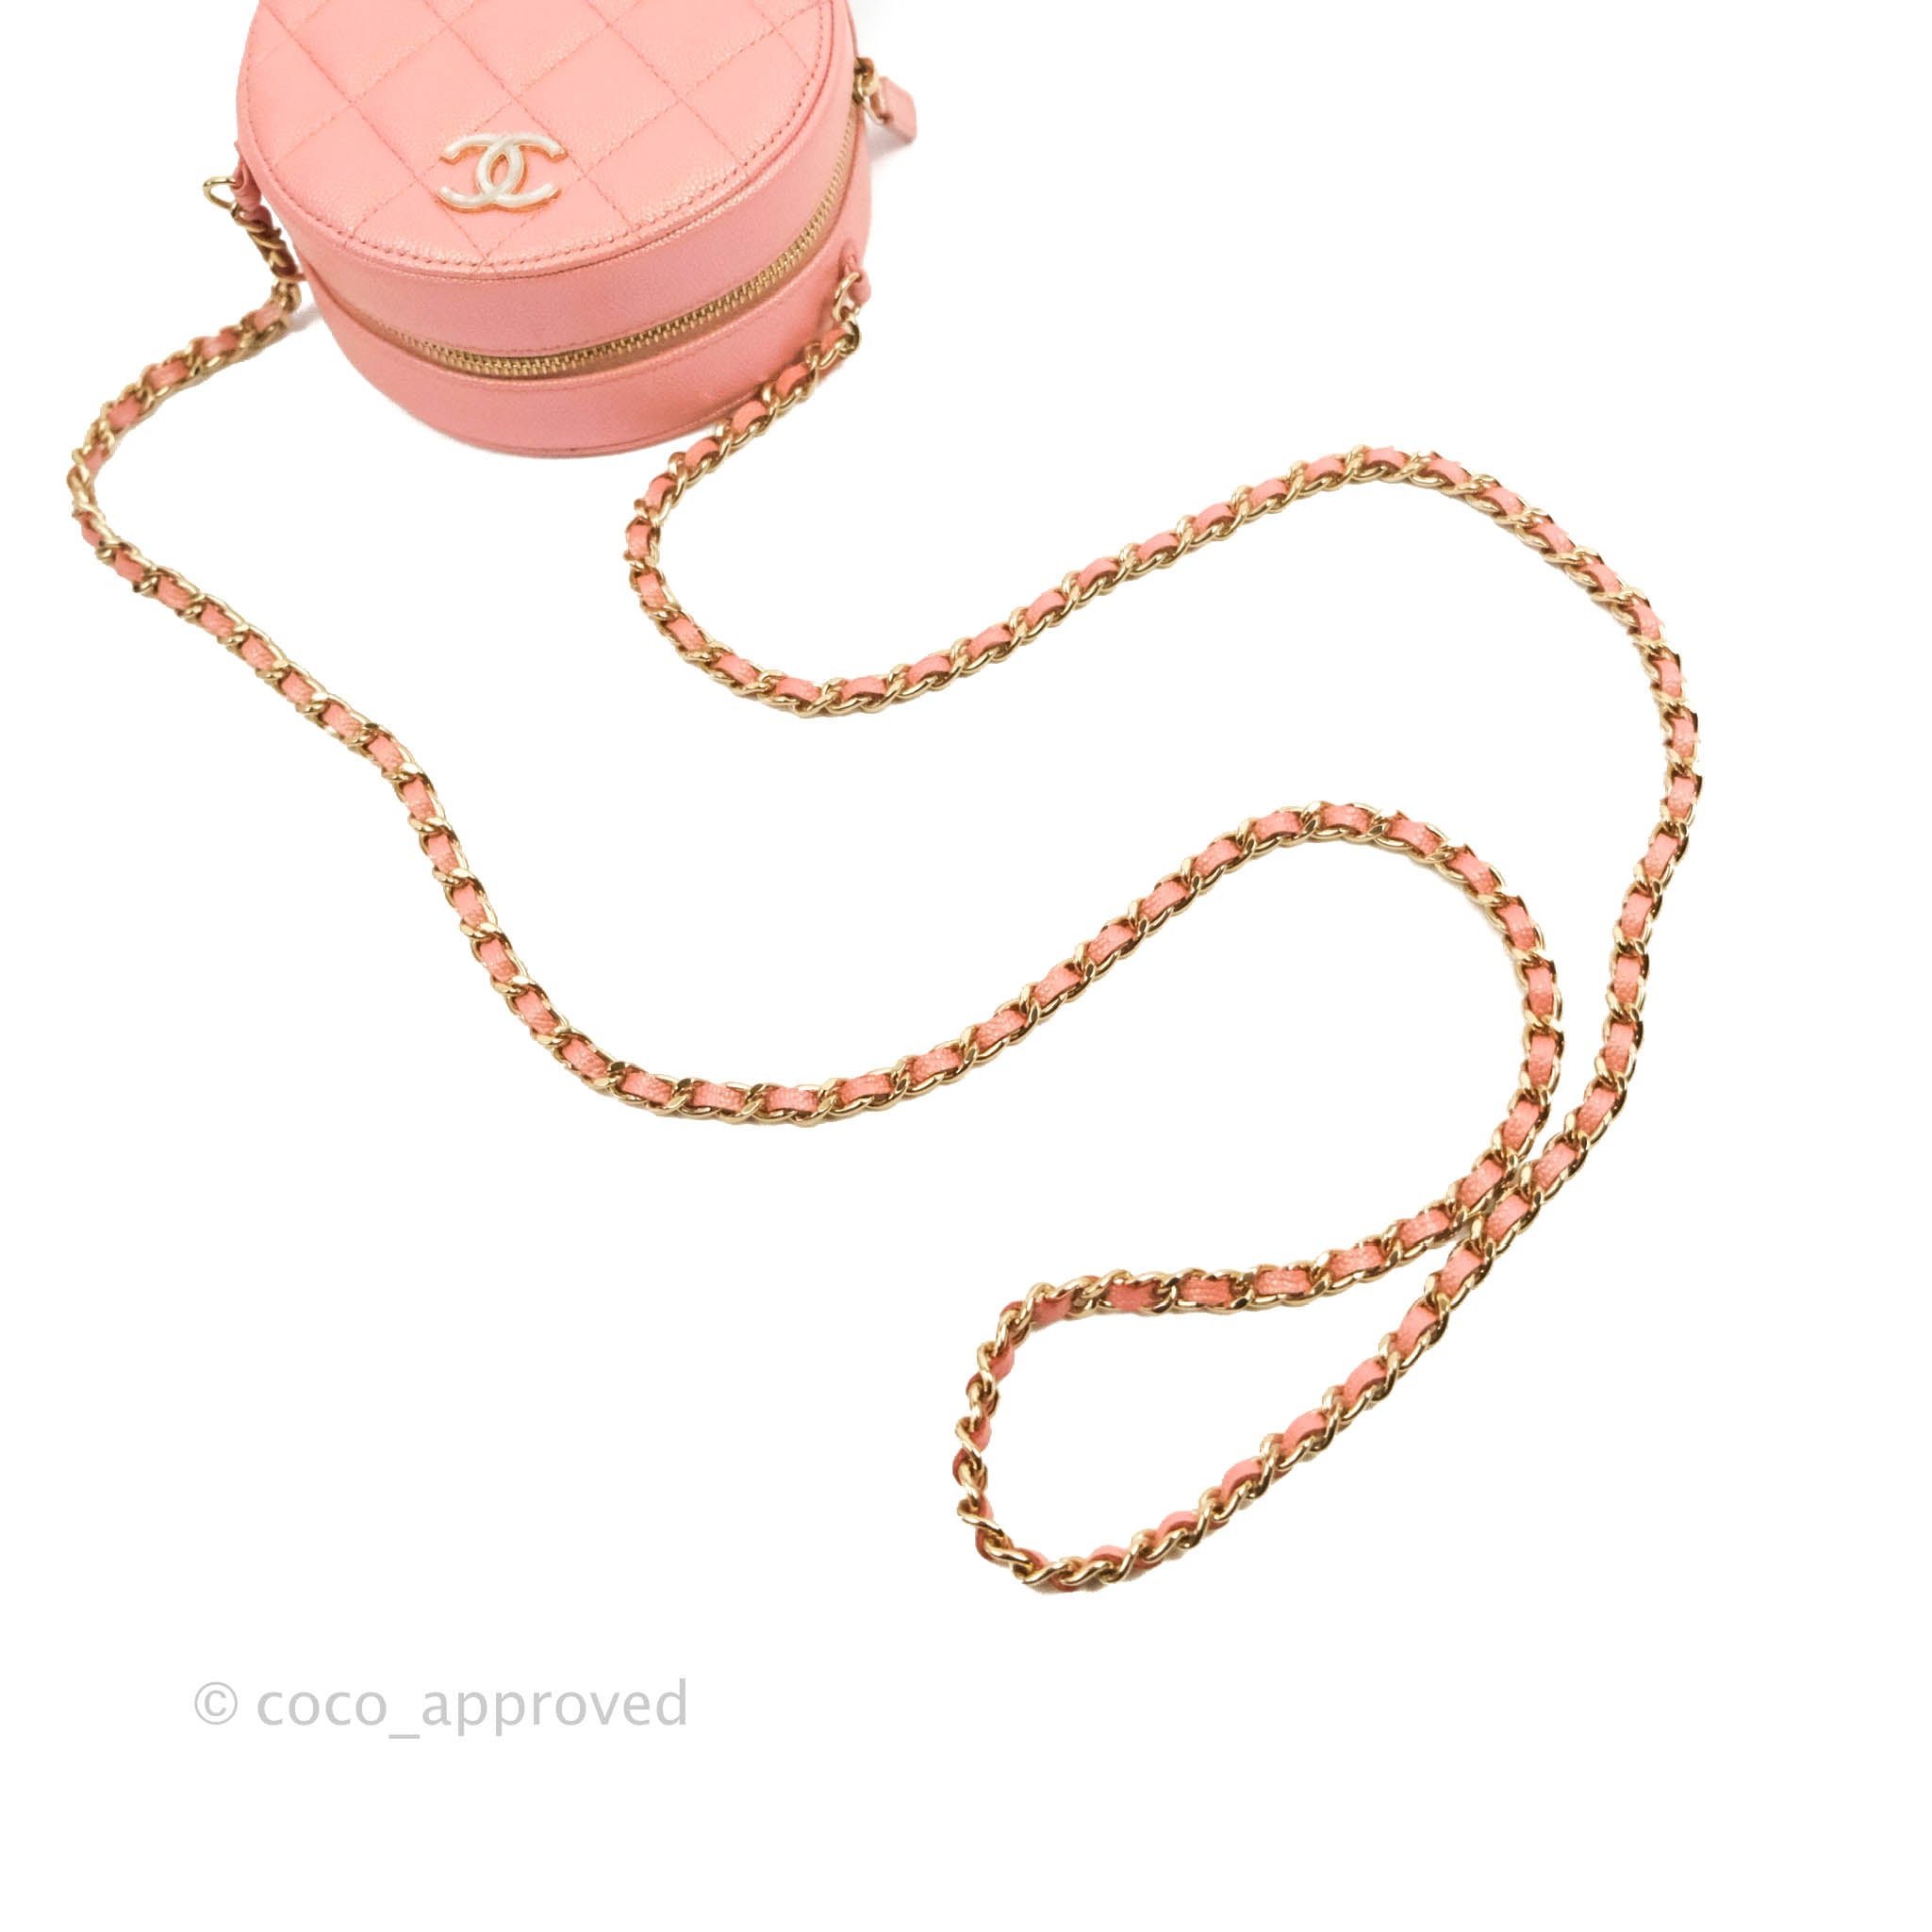 Chanel Pink Round As Earth Bag of Patent Leather with Silver